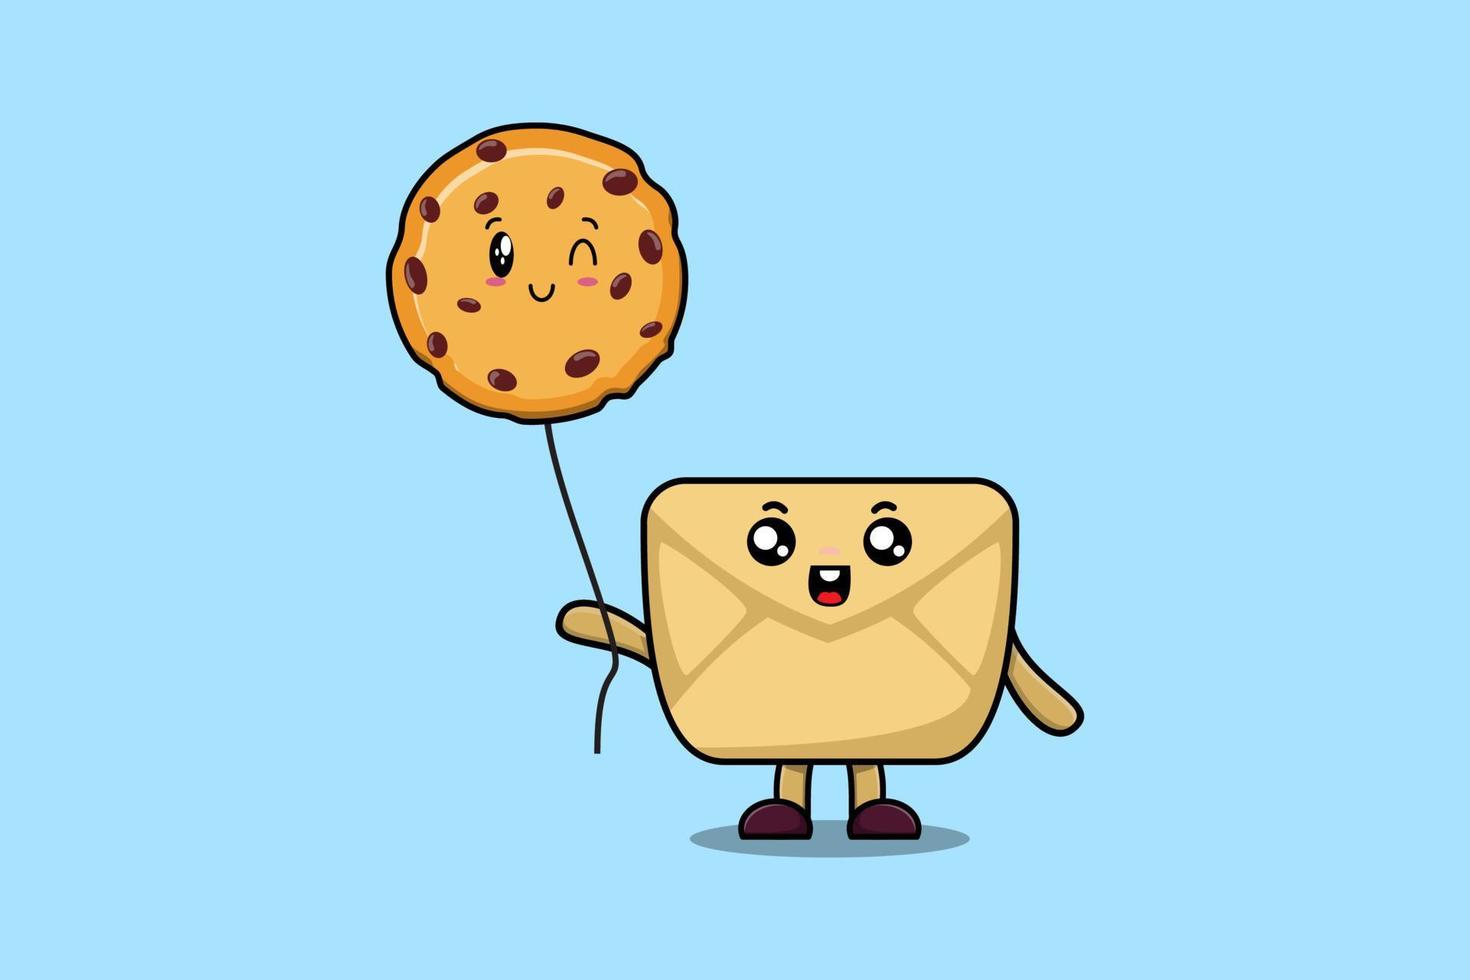 Cute cartoon Envelope float with biscuits balloon vector